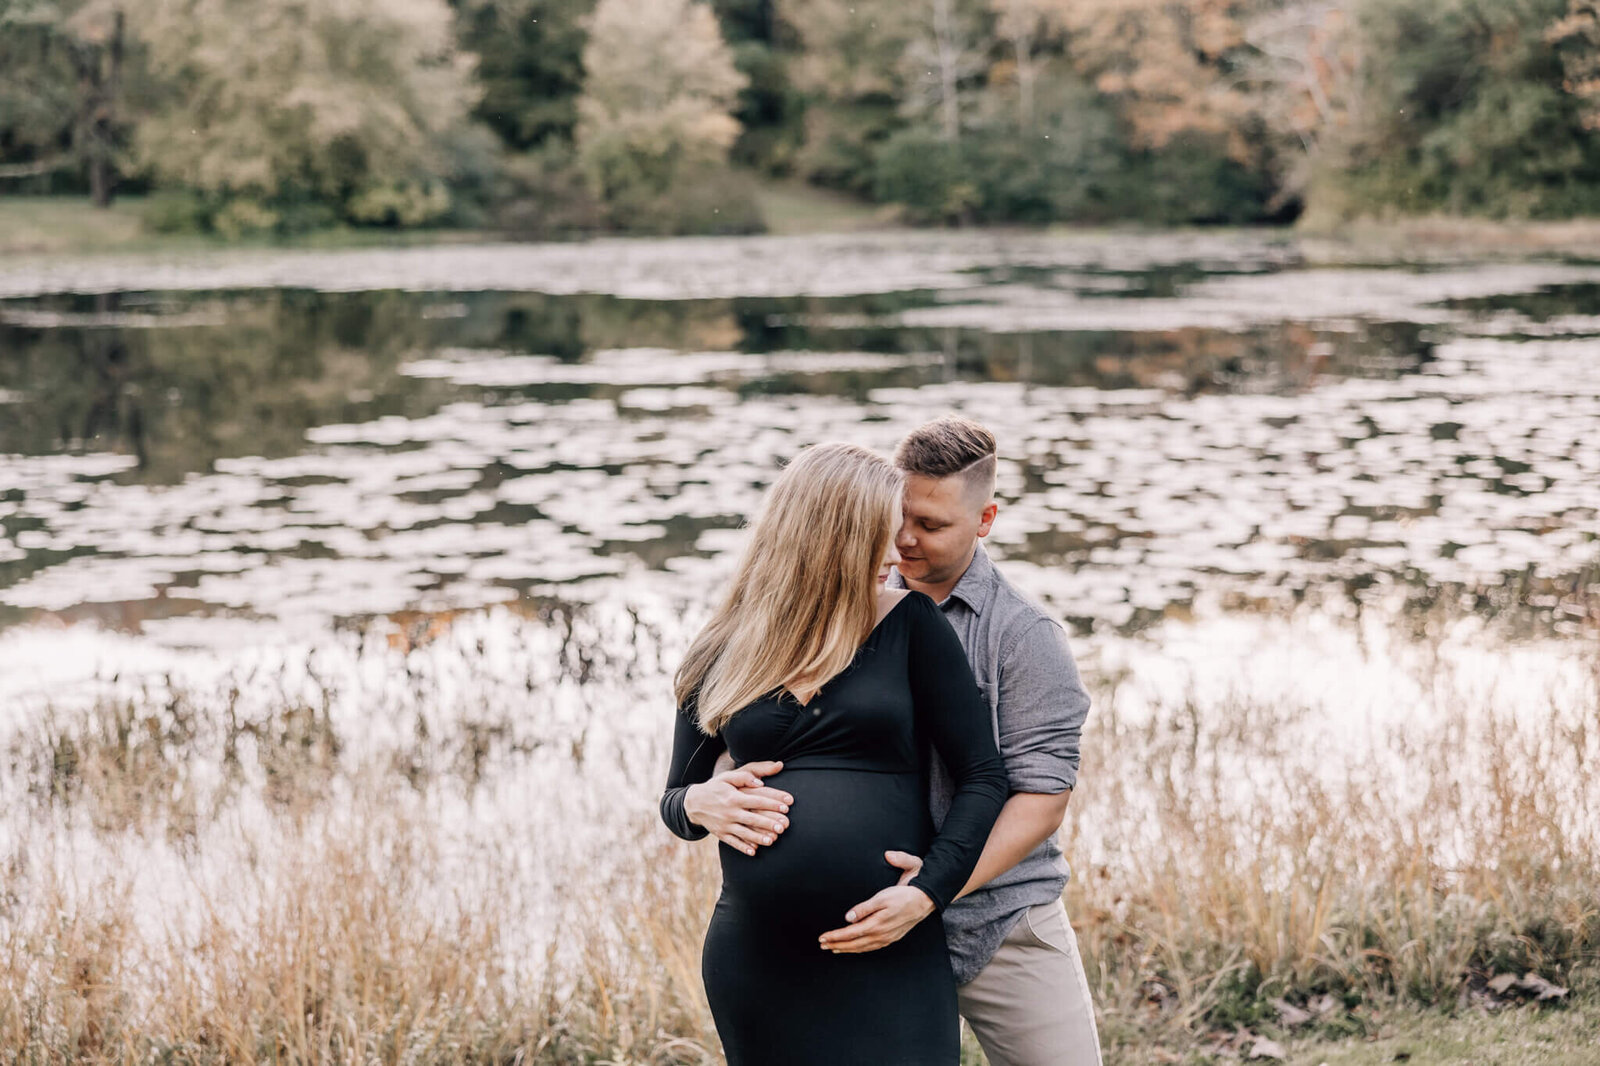 Pregnant woman with blond hair in black dress poses with her husband in front of Sawmill Pond in Ledyard, CT